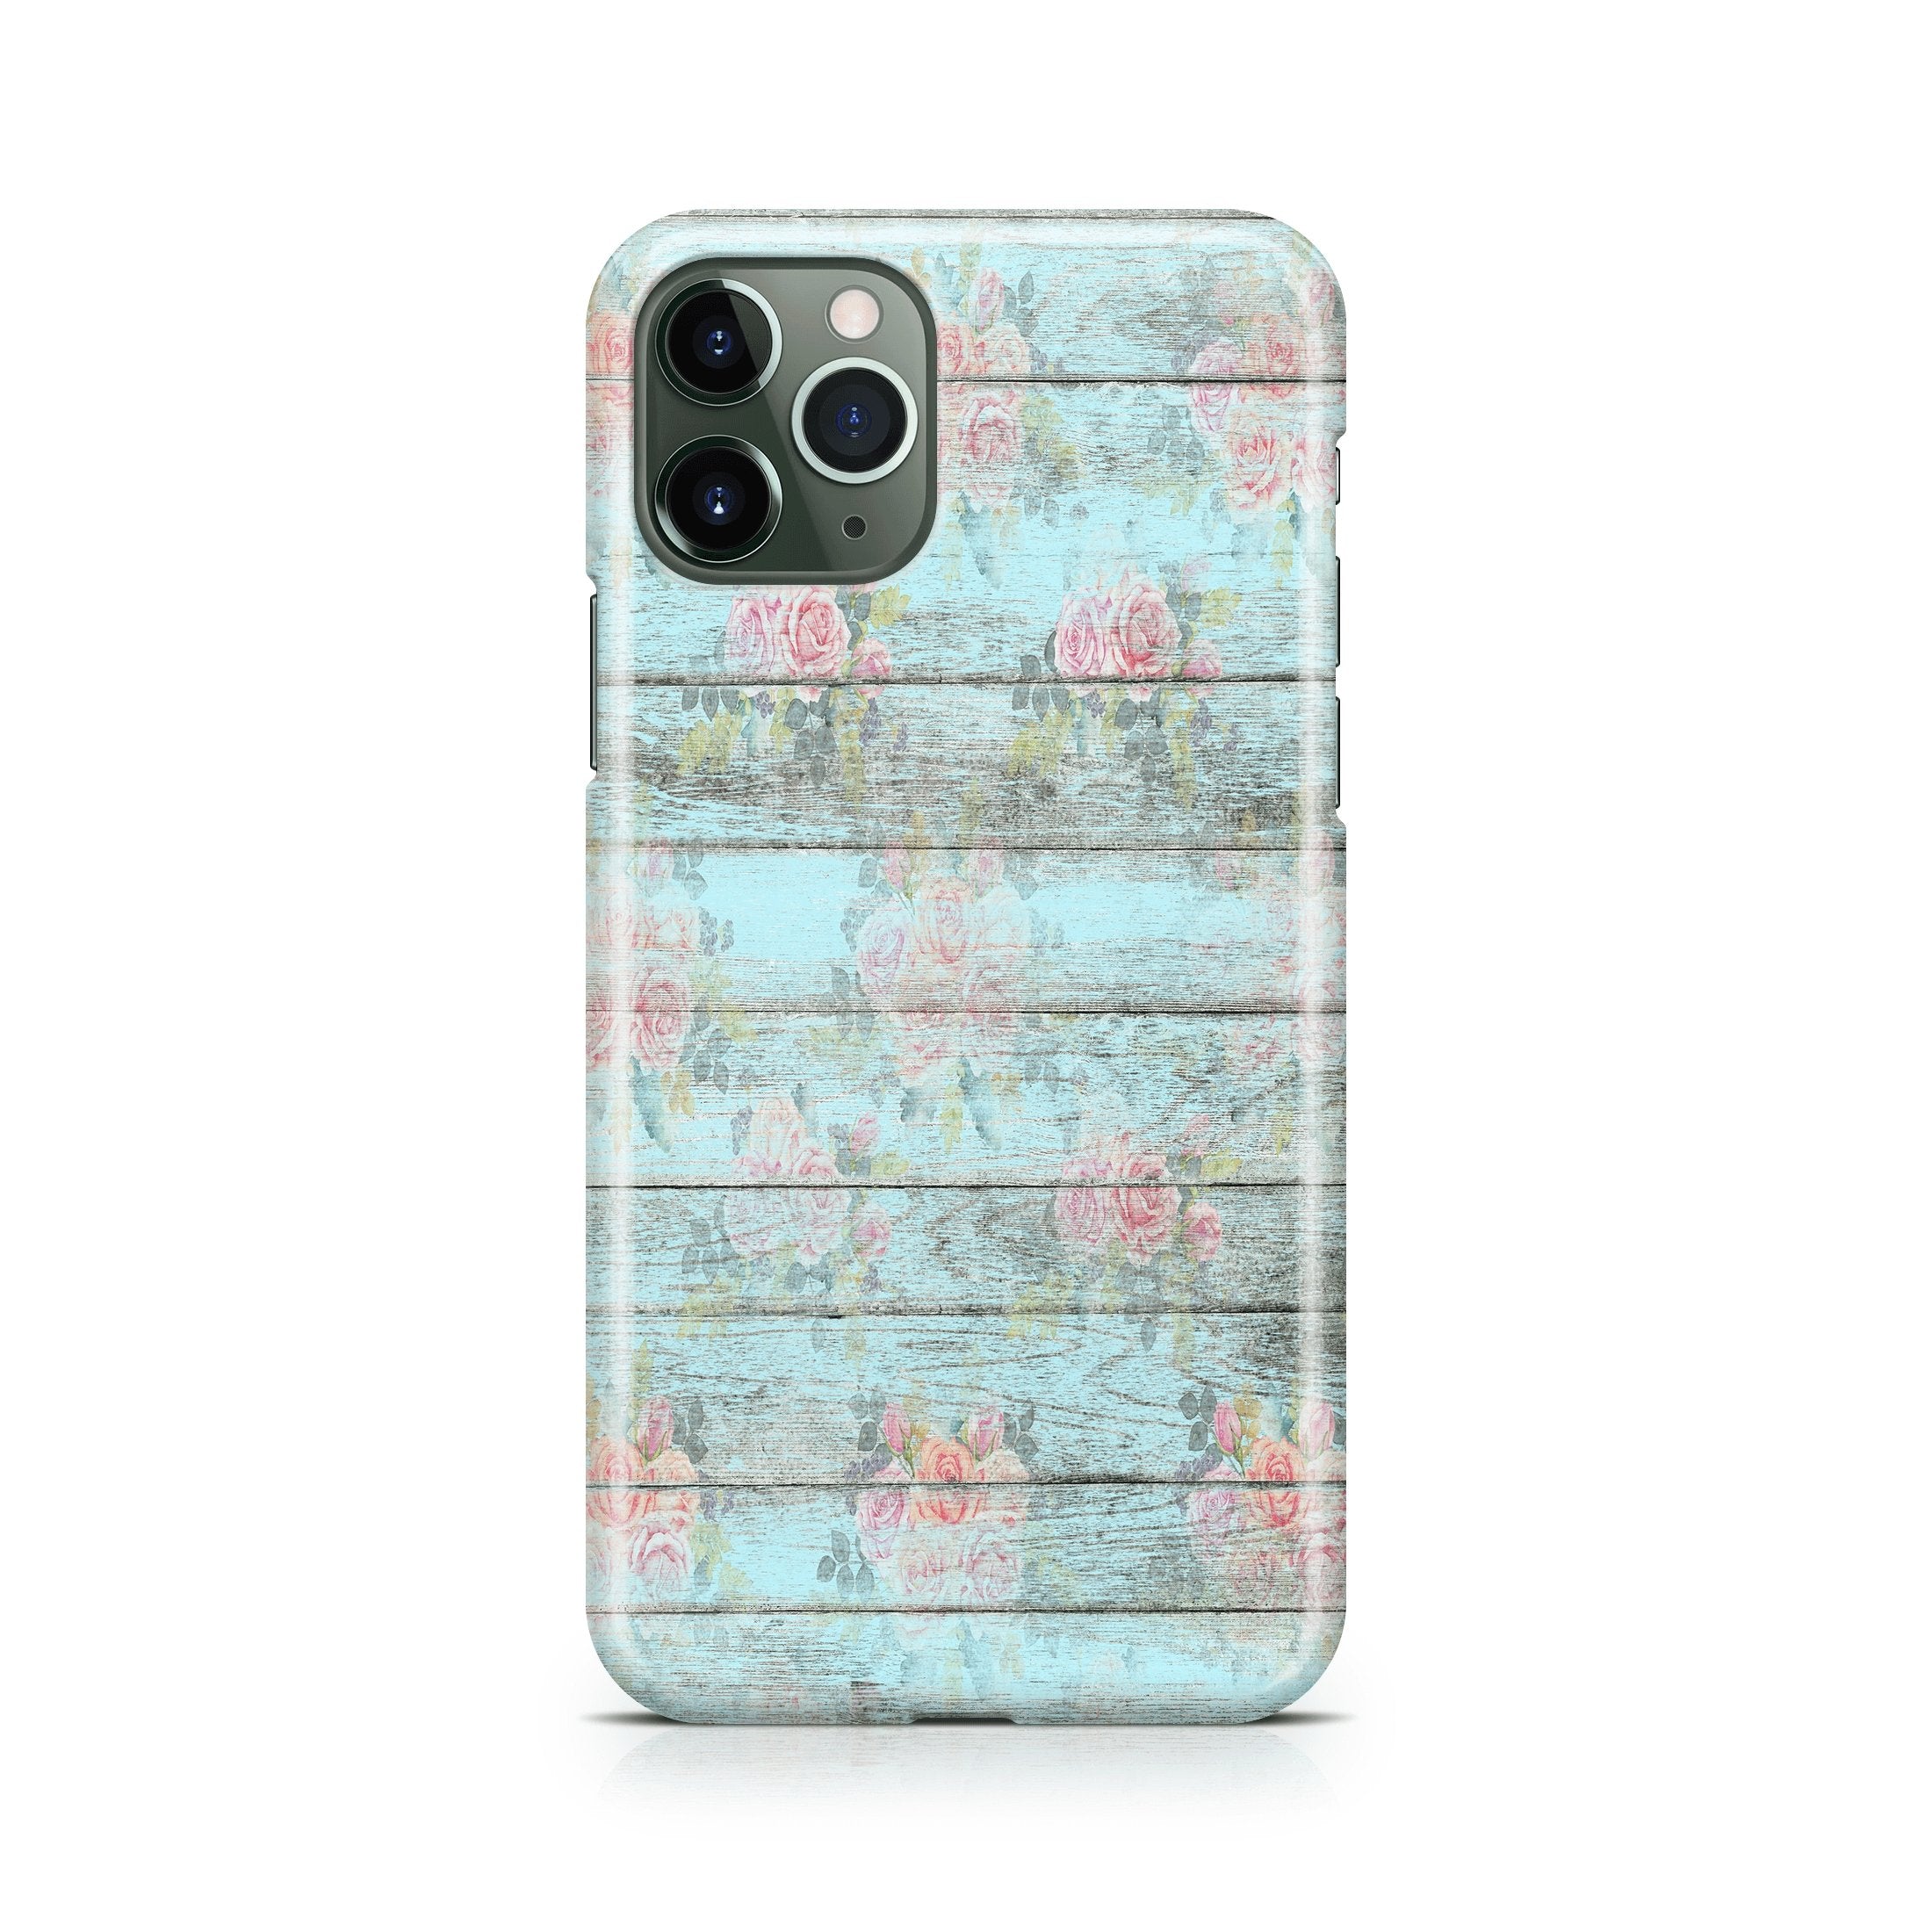 Shabby Chic Wood - iPhone phone case designs by CaseSwagger